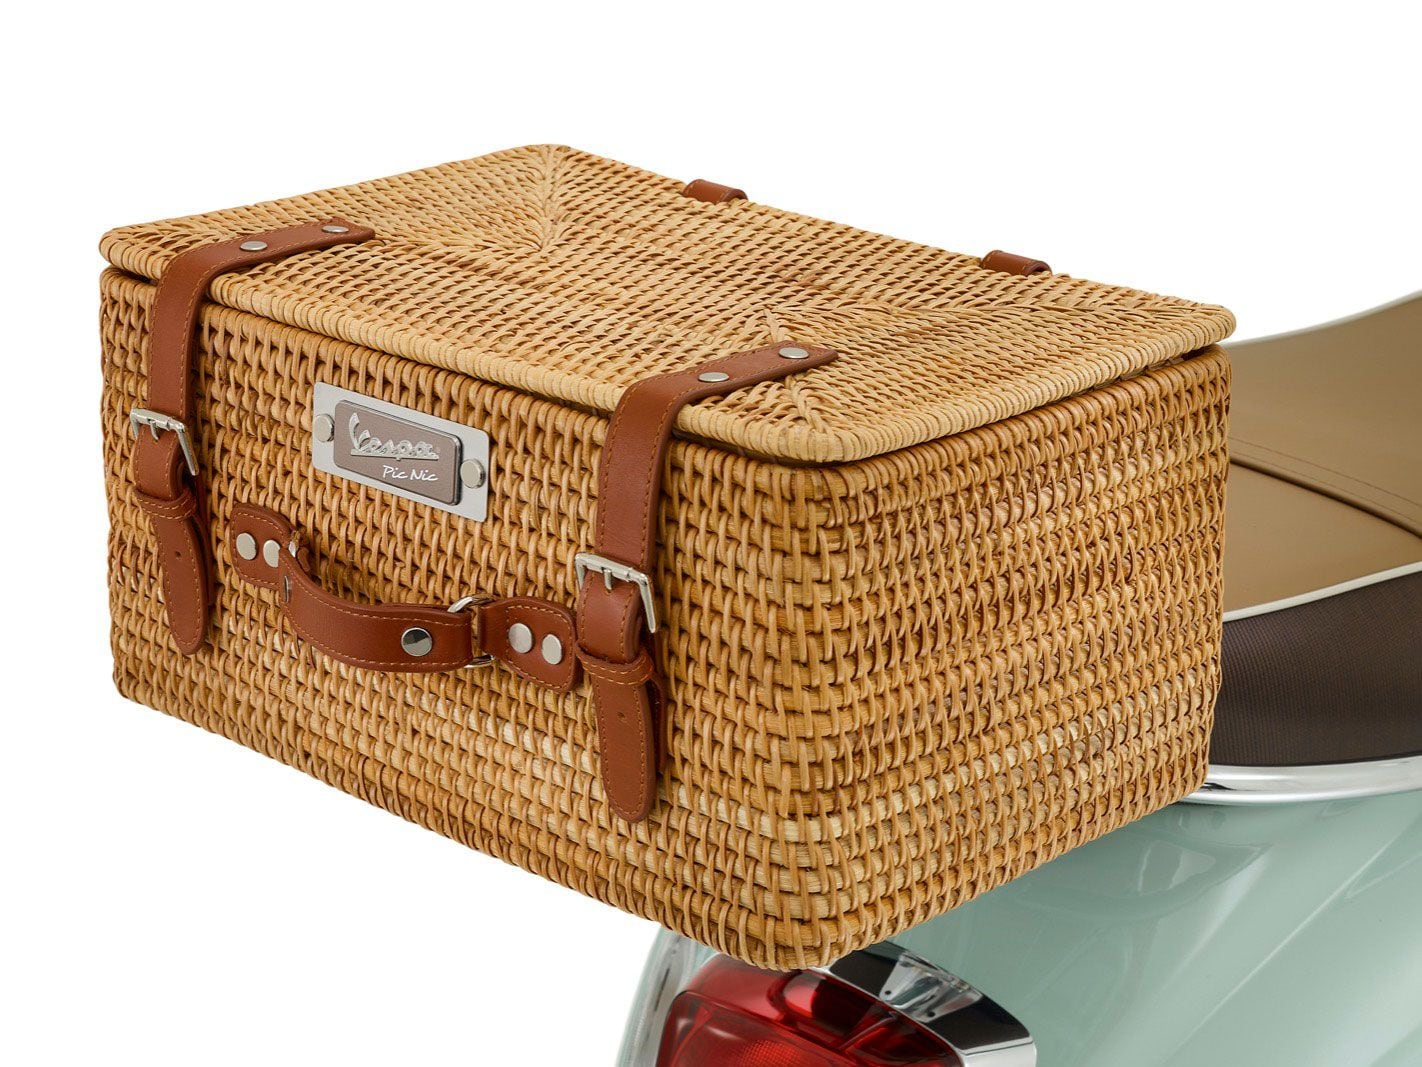 If the invitation says BYOB (bring your own basket), Pic Nic has you covered with a wicker picnic basket as standard.